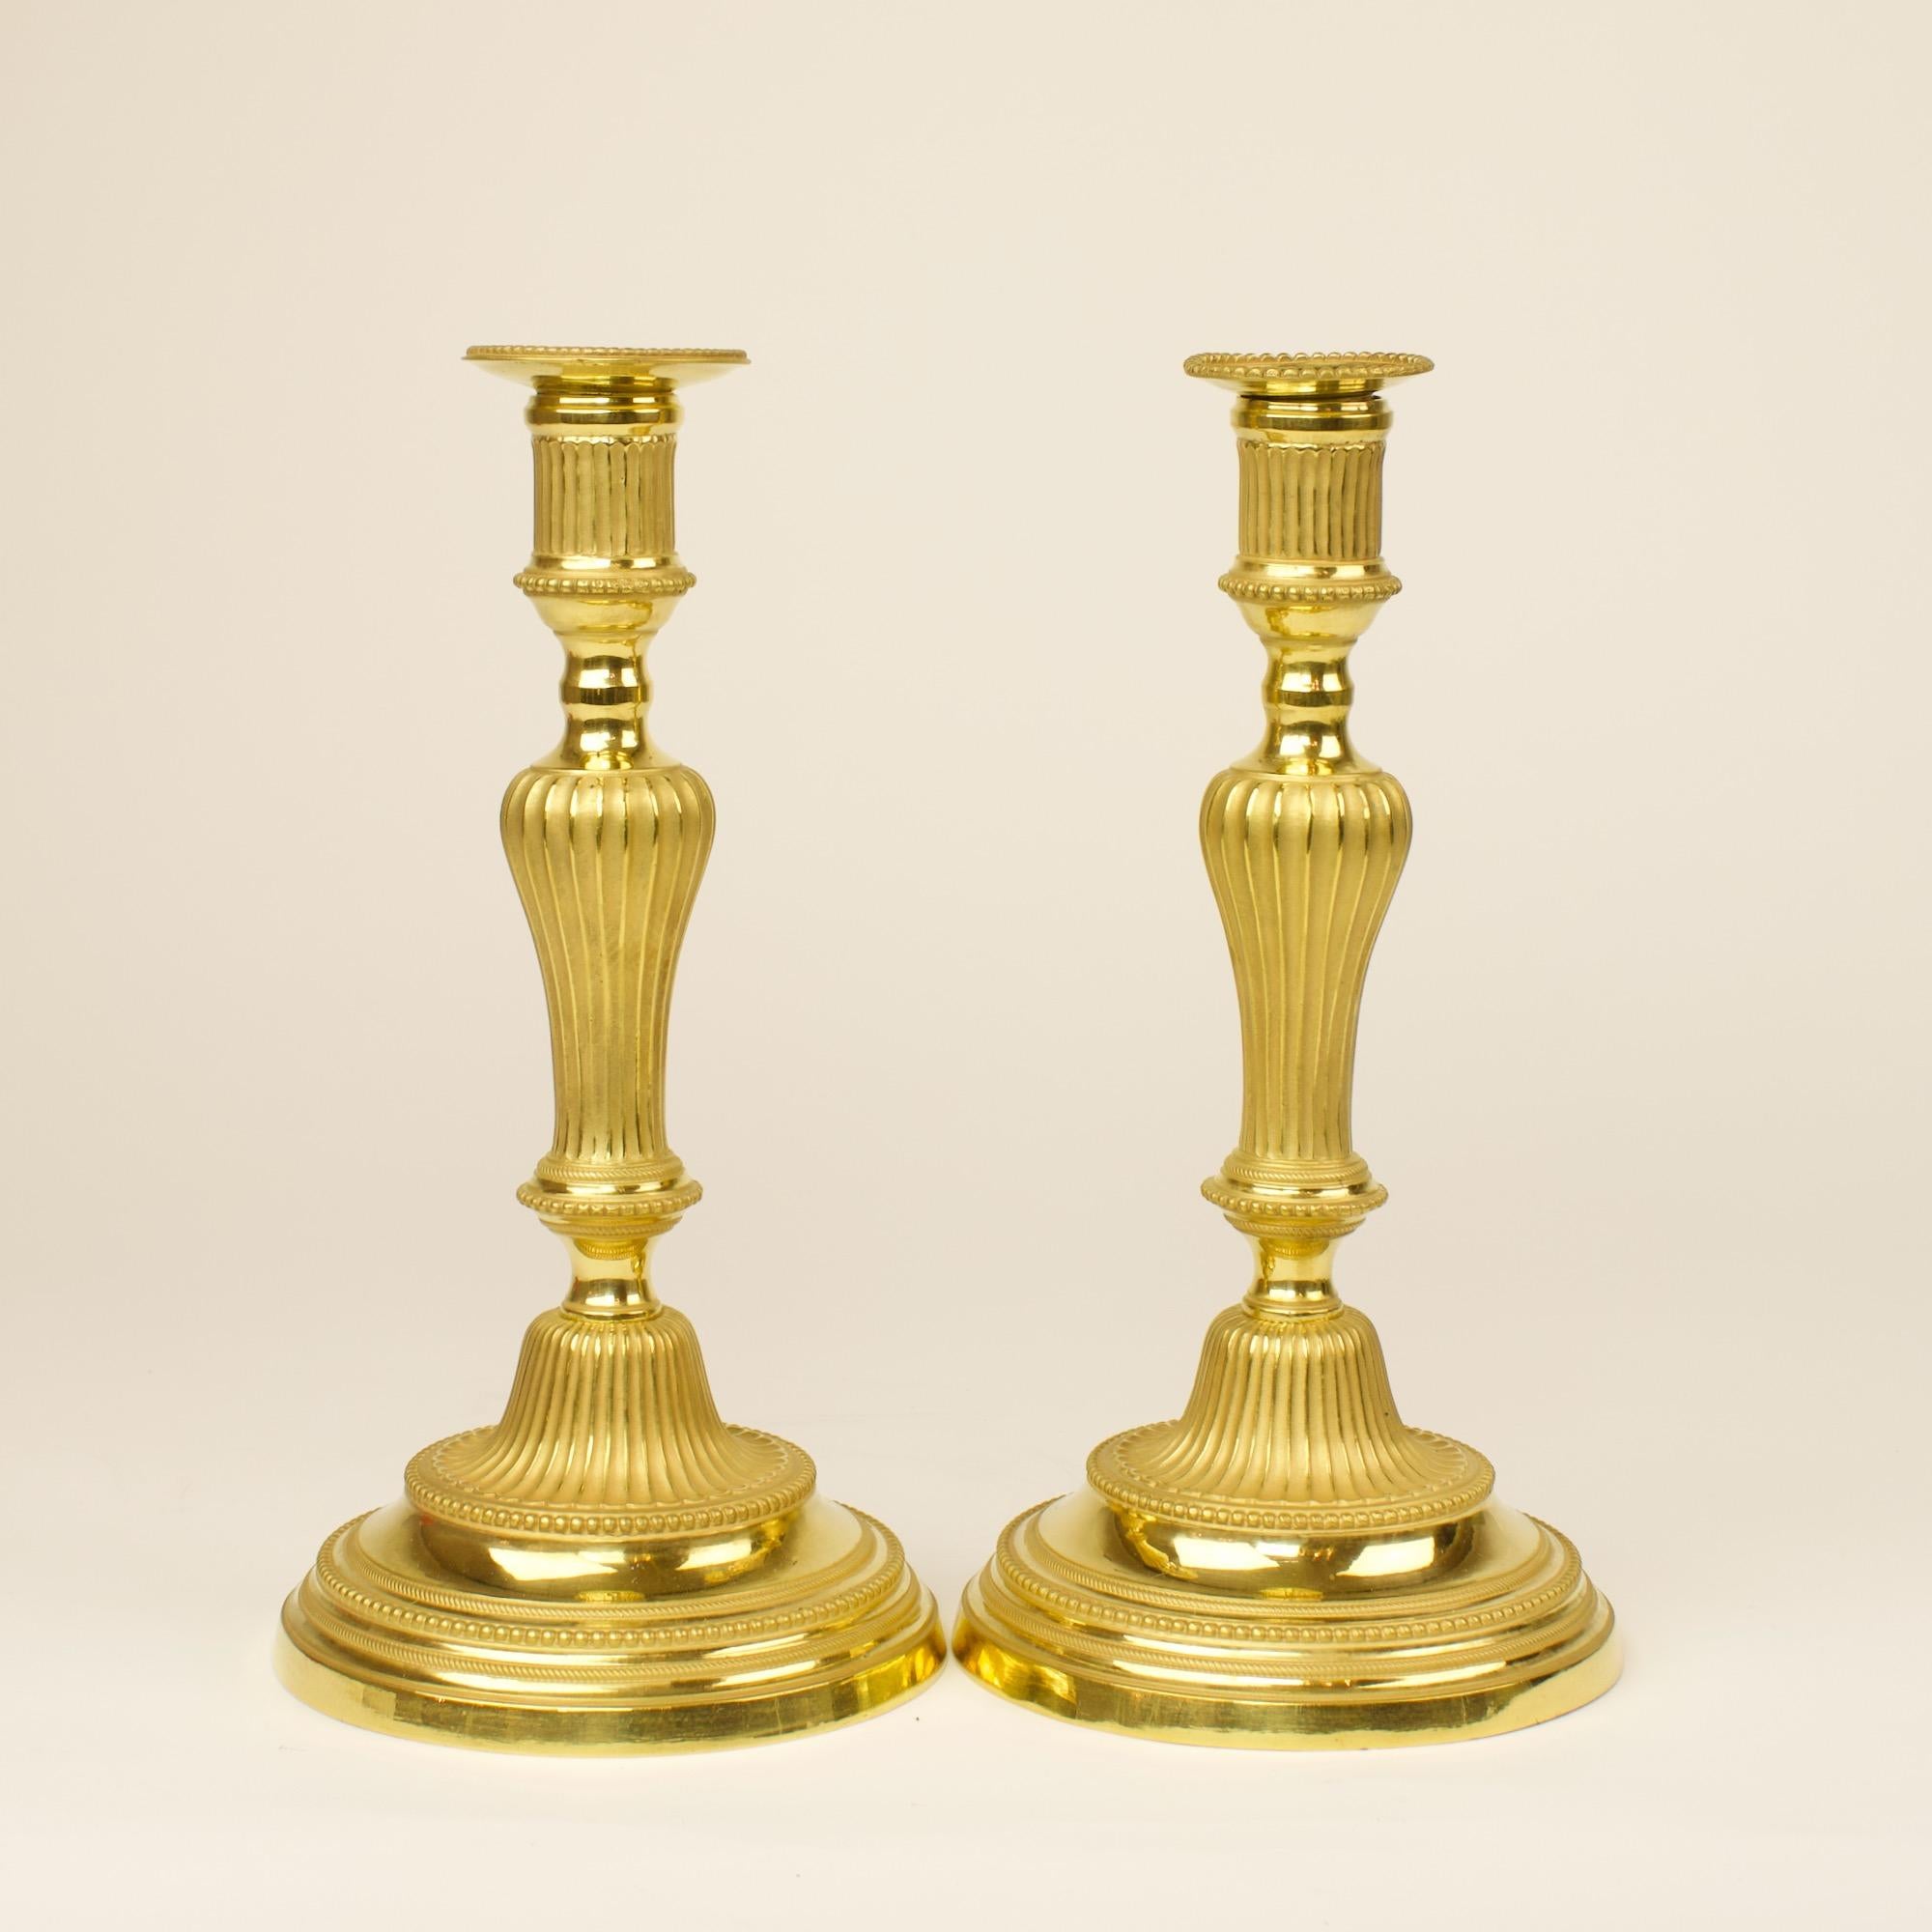 Pair of 18th century French transition Louis XVI gilt bronze candlesticks

A baluster-shaped tapering fluted stem on a large round base and fluted plinth with pearl frieze. A cylindrical fluted nozzle with drip pans (slightly different from each